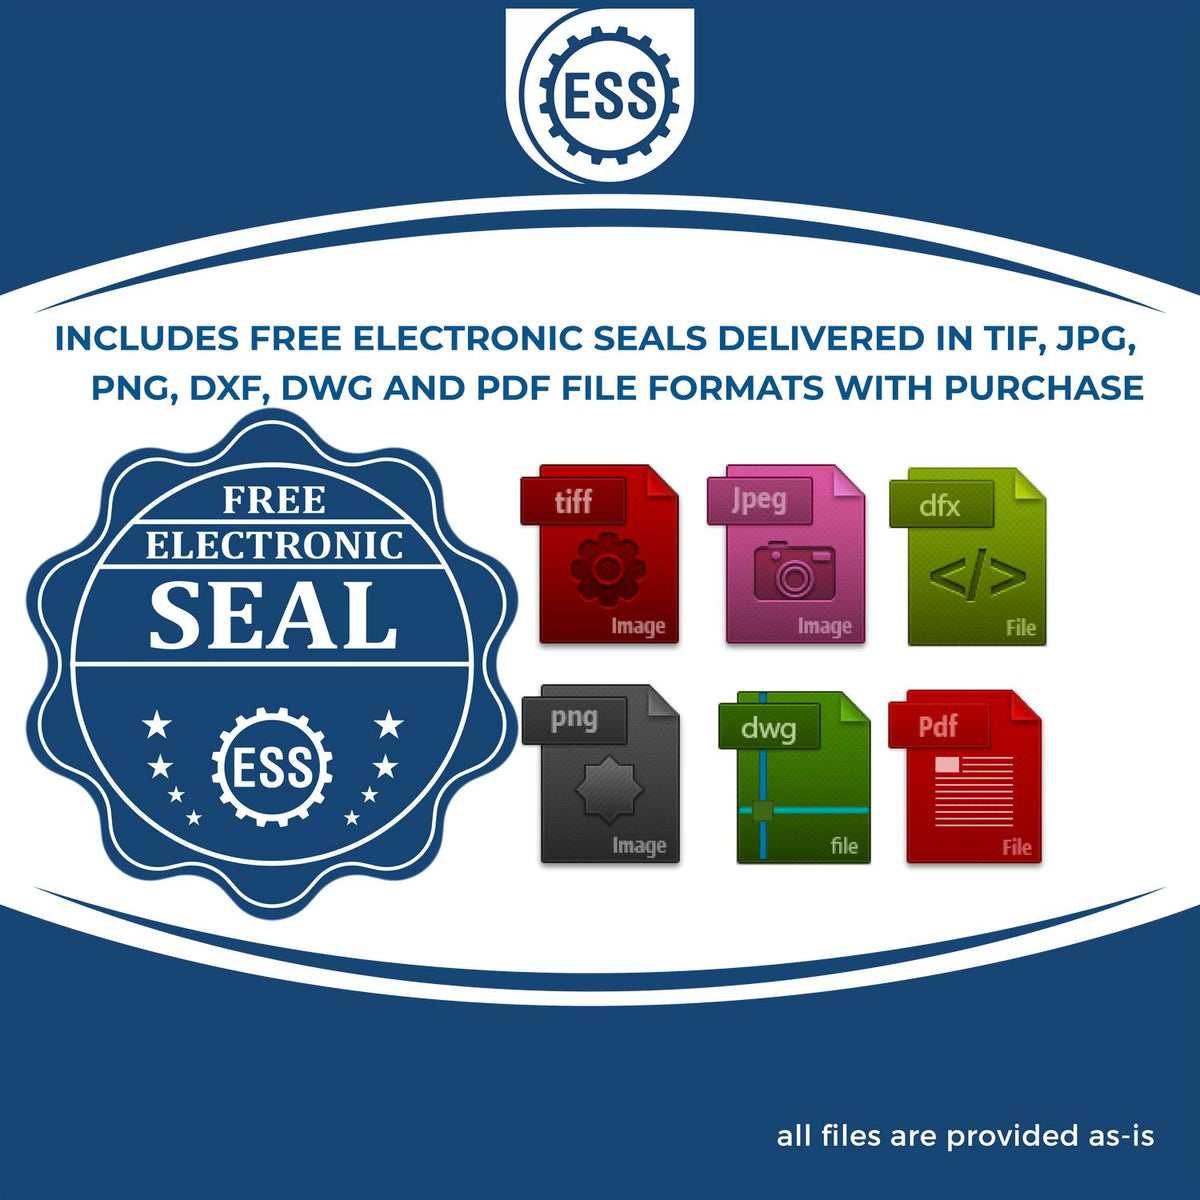 An infographic for the free electronic seal for the Gift Nevada Geologist Seal illustrating the different file type icons such as DXF, DWG, TIF, JPG and PNG.